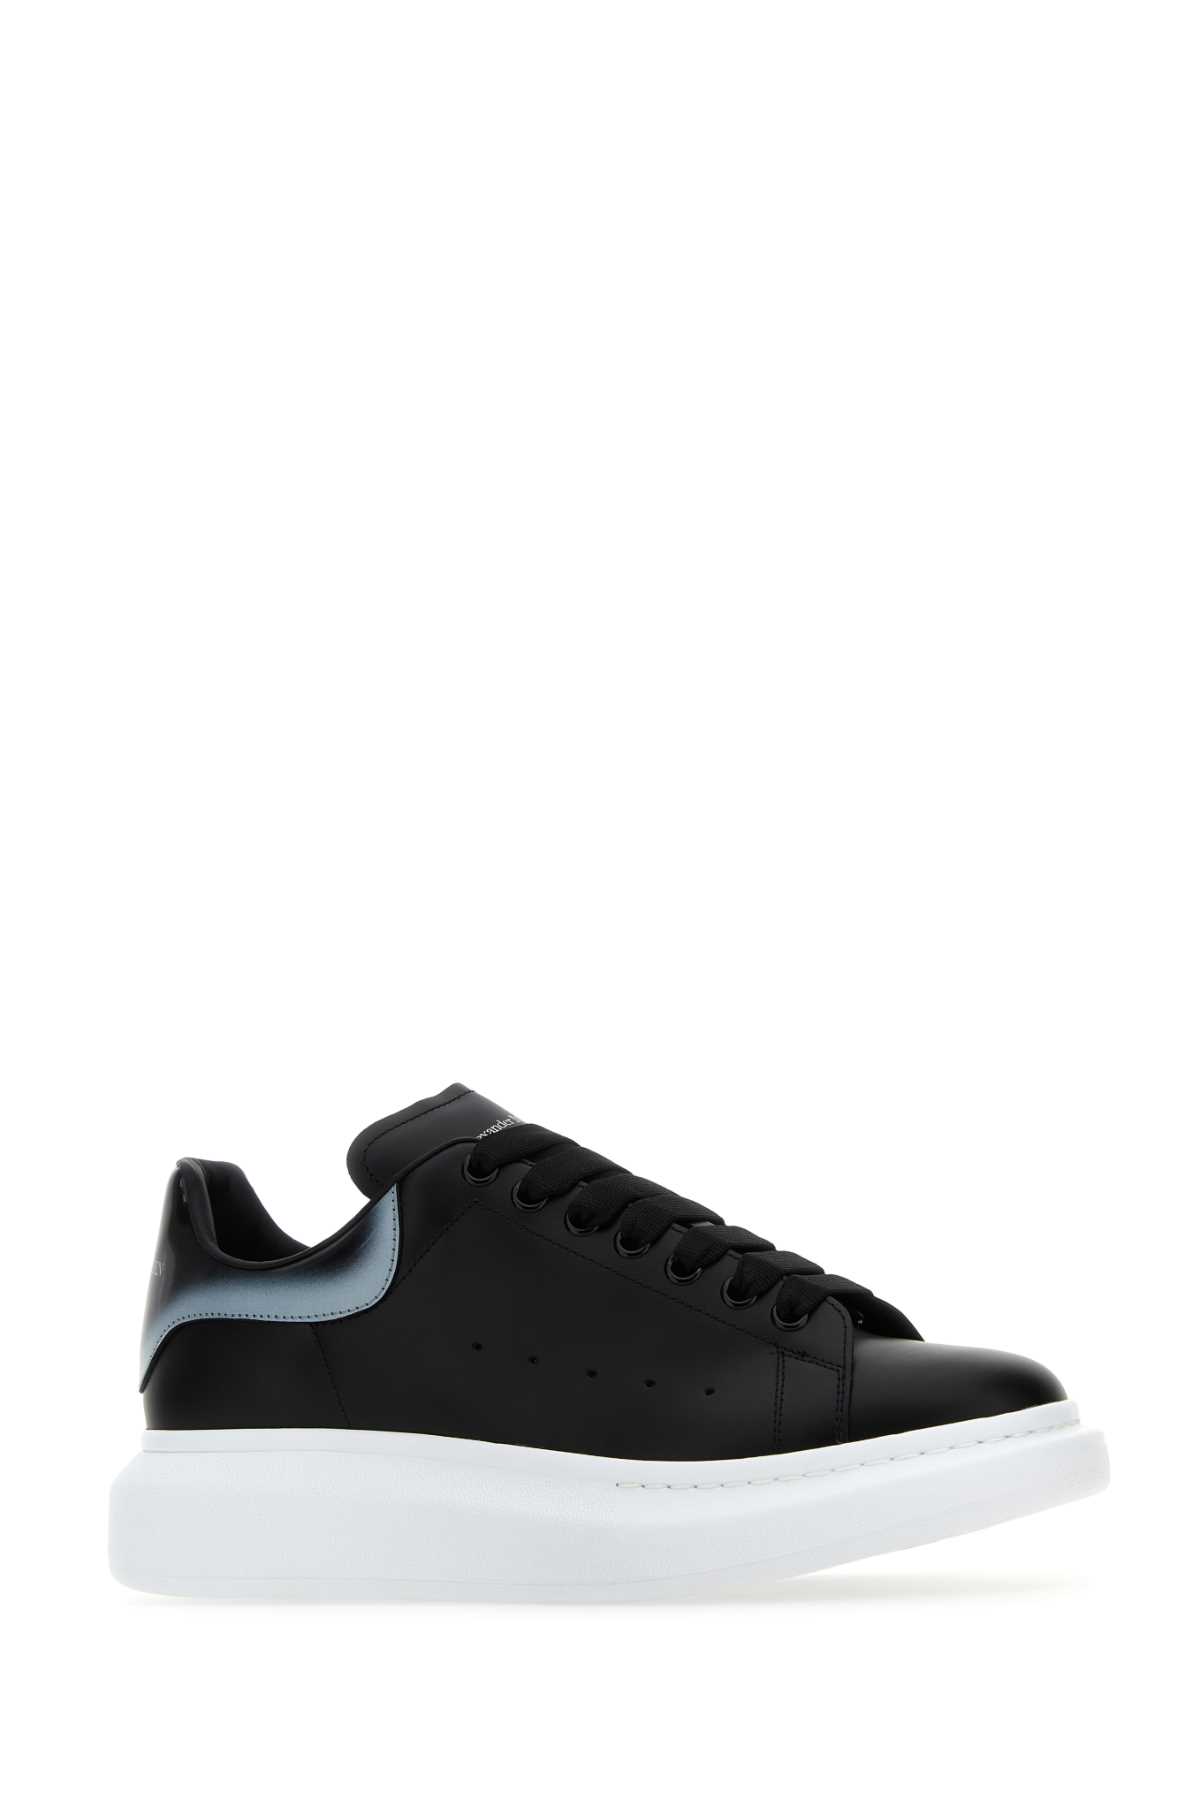 ALEXANDER MCQUEEN BLACK LEATHER SNEAKERS WITH TWO-TONE LEATHER HEEL